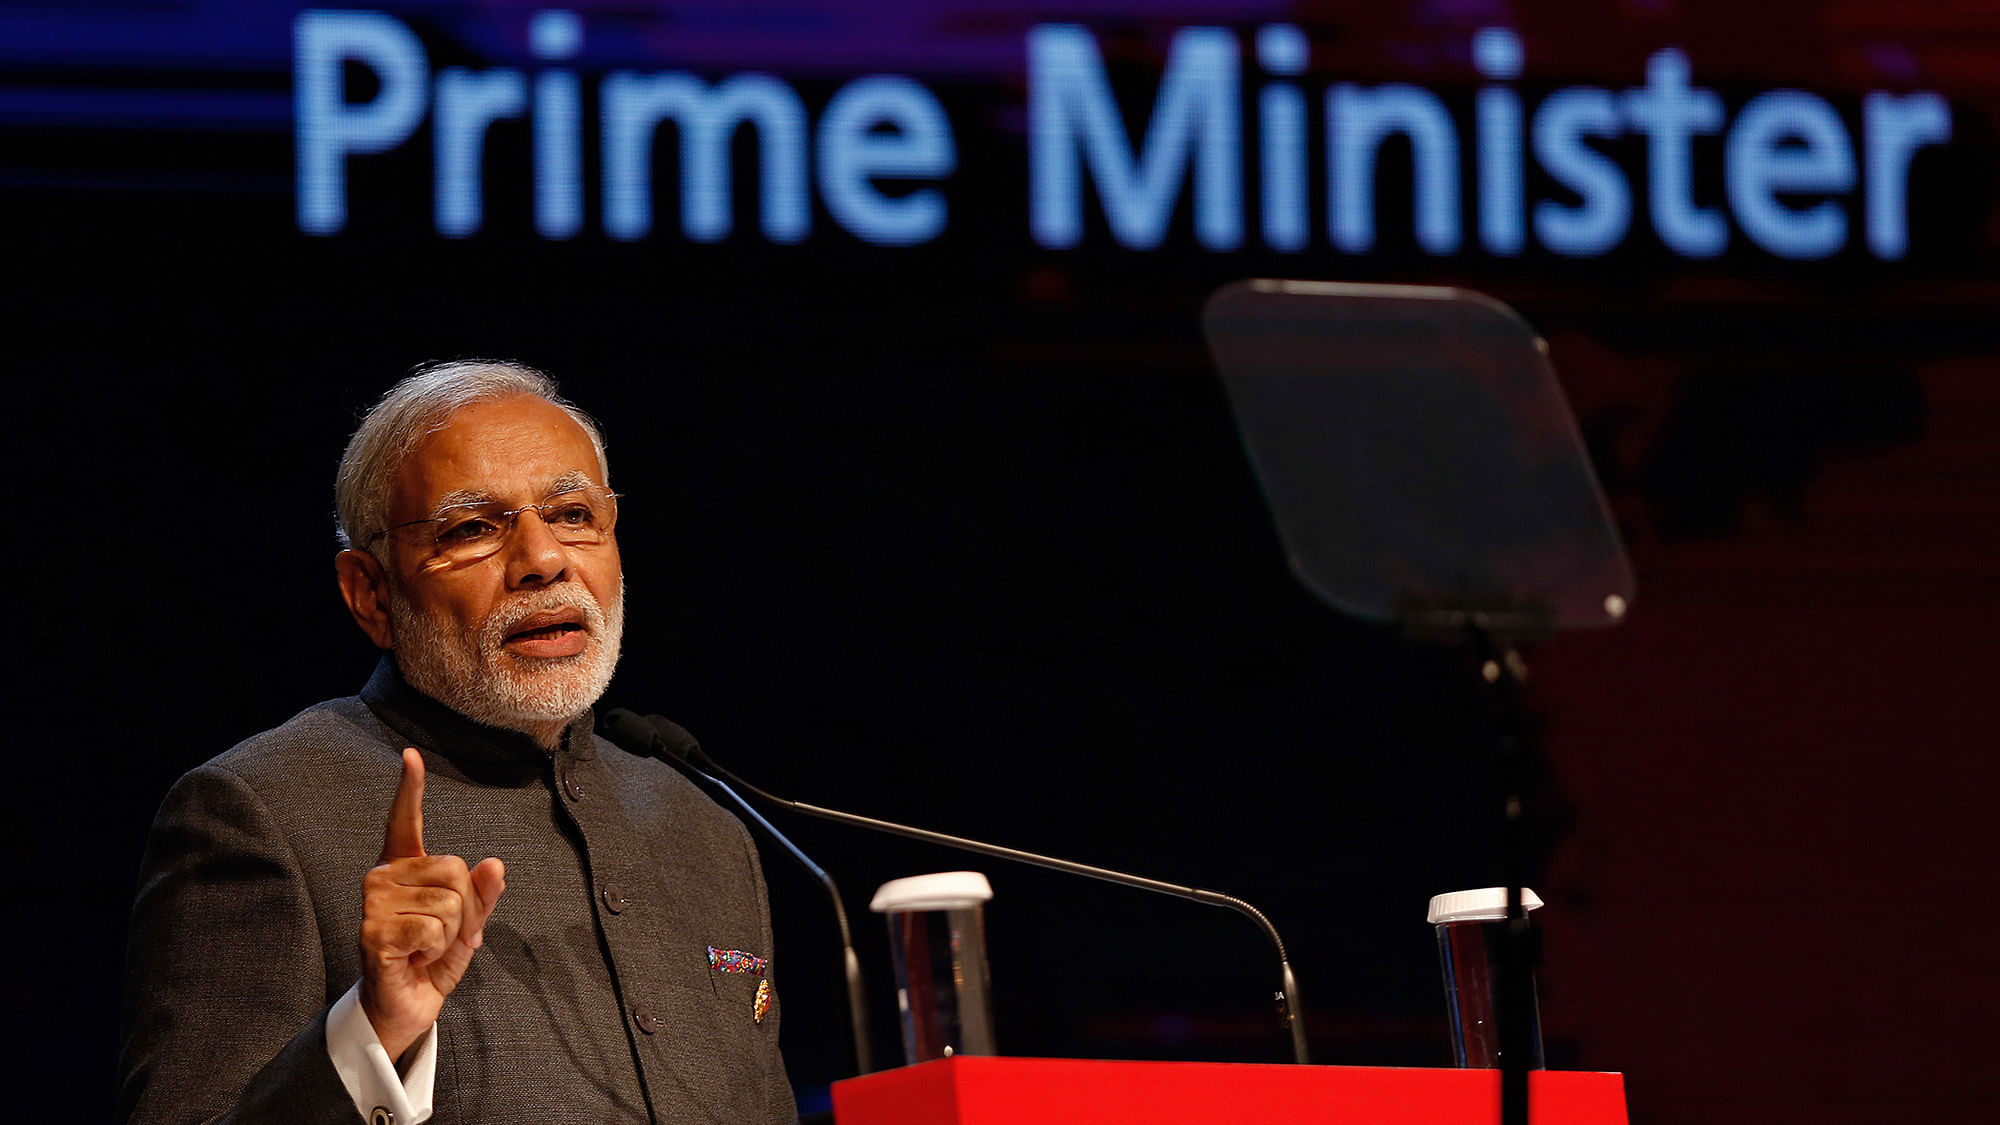 Prime Minister Narendra Modi speaks at the Association of Southeast Asian Nations (ASEAN) Business and Investment Summit in Kuala Lumpur, Malaysia  (Photo: AP)